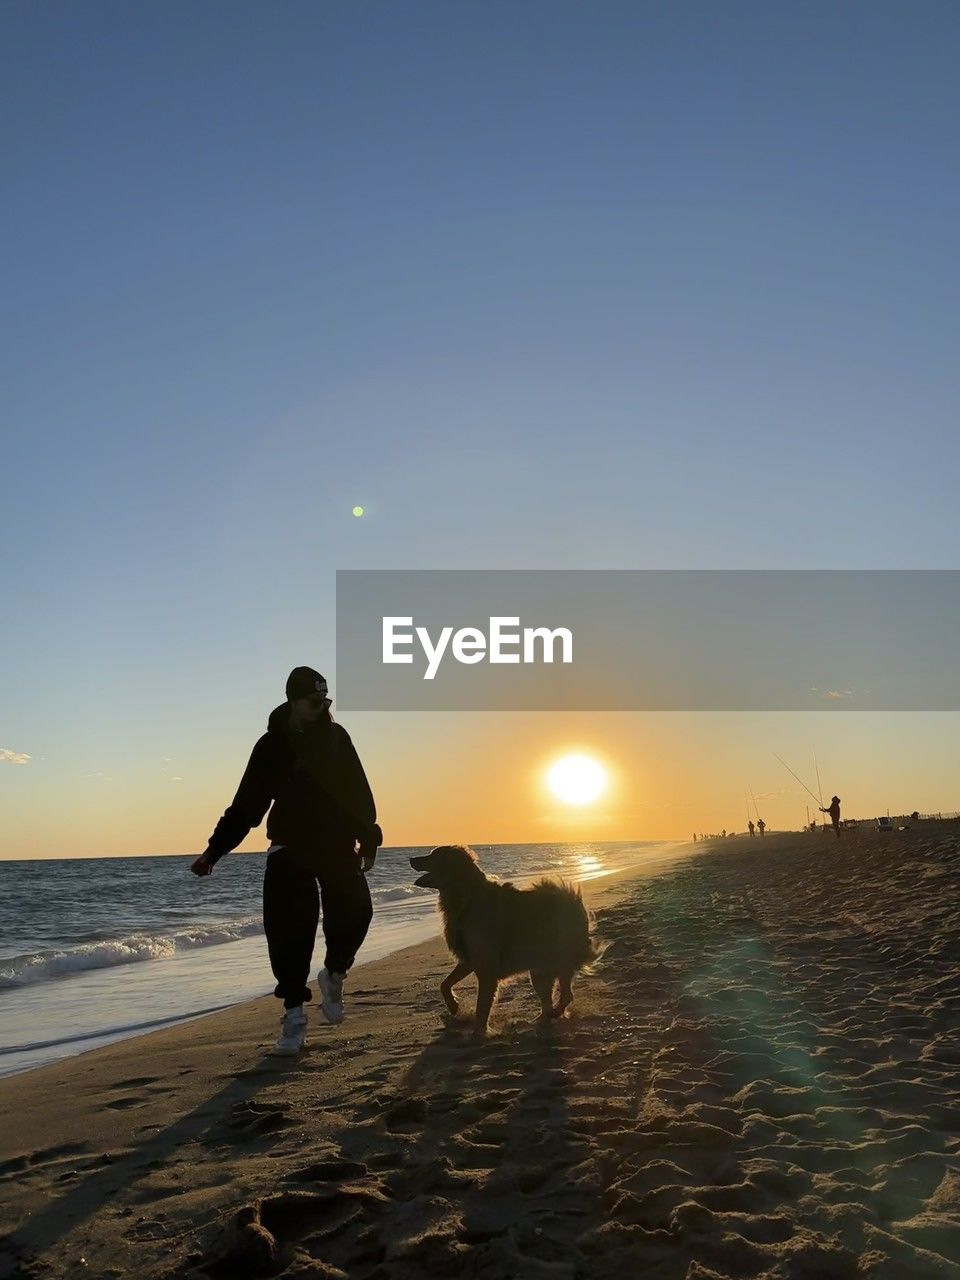 sky, dog, ocean, animal, horizon, sea, animal themes, mammal, domestic animals, beach, land, pet, one animal, sunset, canine, nature, water, coast, silhouette, full length, beauty in nature, sand, adult, walking, sunlight, leisure activity, wave, motion, carnivore, sun, men, lifestyles, clear sky, copy space, scenics - nature, one person, rear view, person, shore, tranquility, outdoors, women, back lit, holiday, vacation, evening, trip, horizon over water